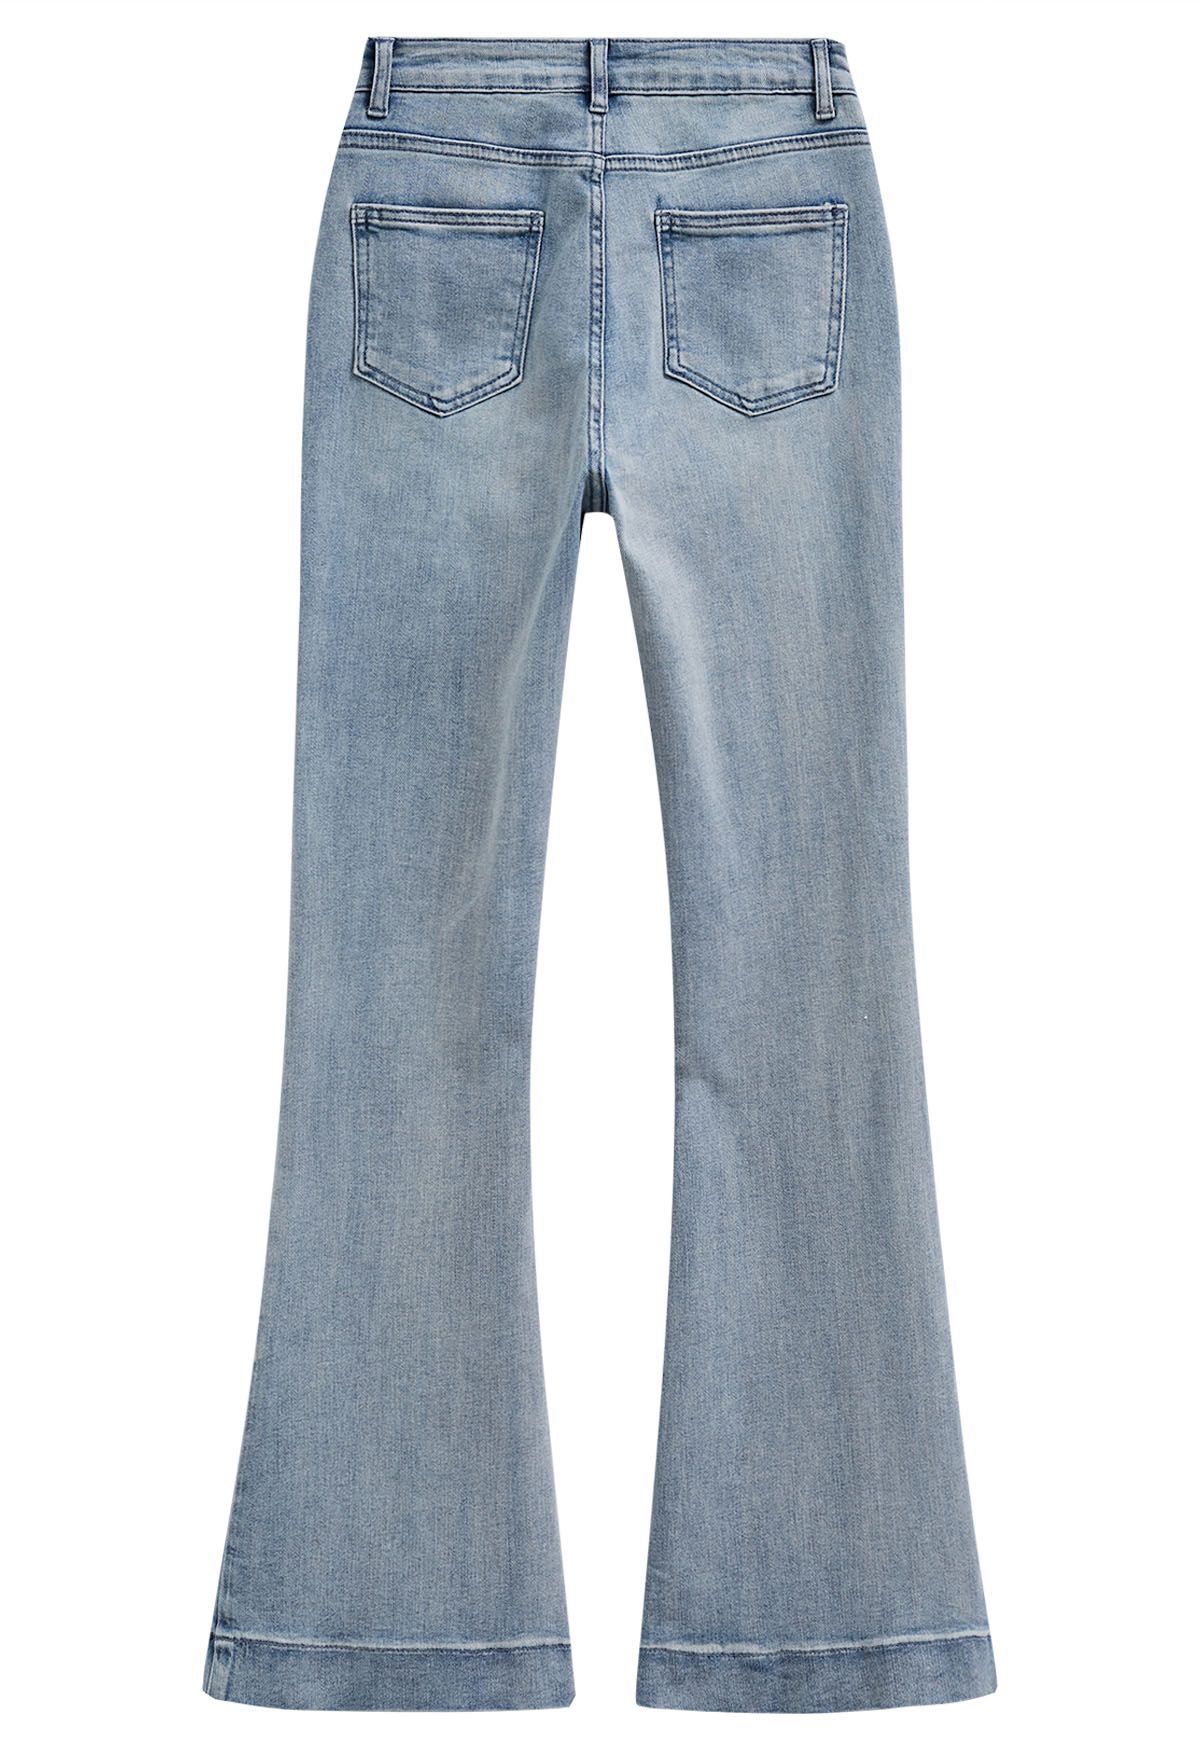 On-Trend High Waist Flare Leg Jeans in Blue - Retro, Indie and Unique ...